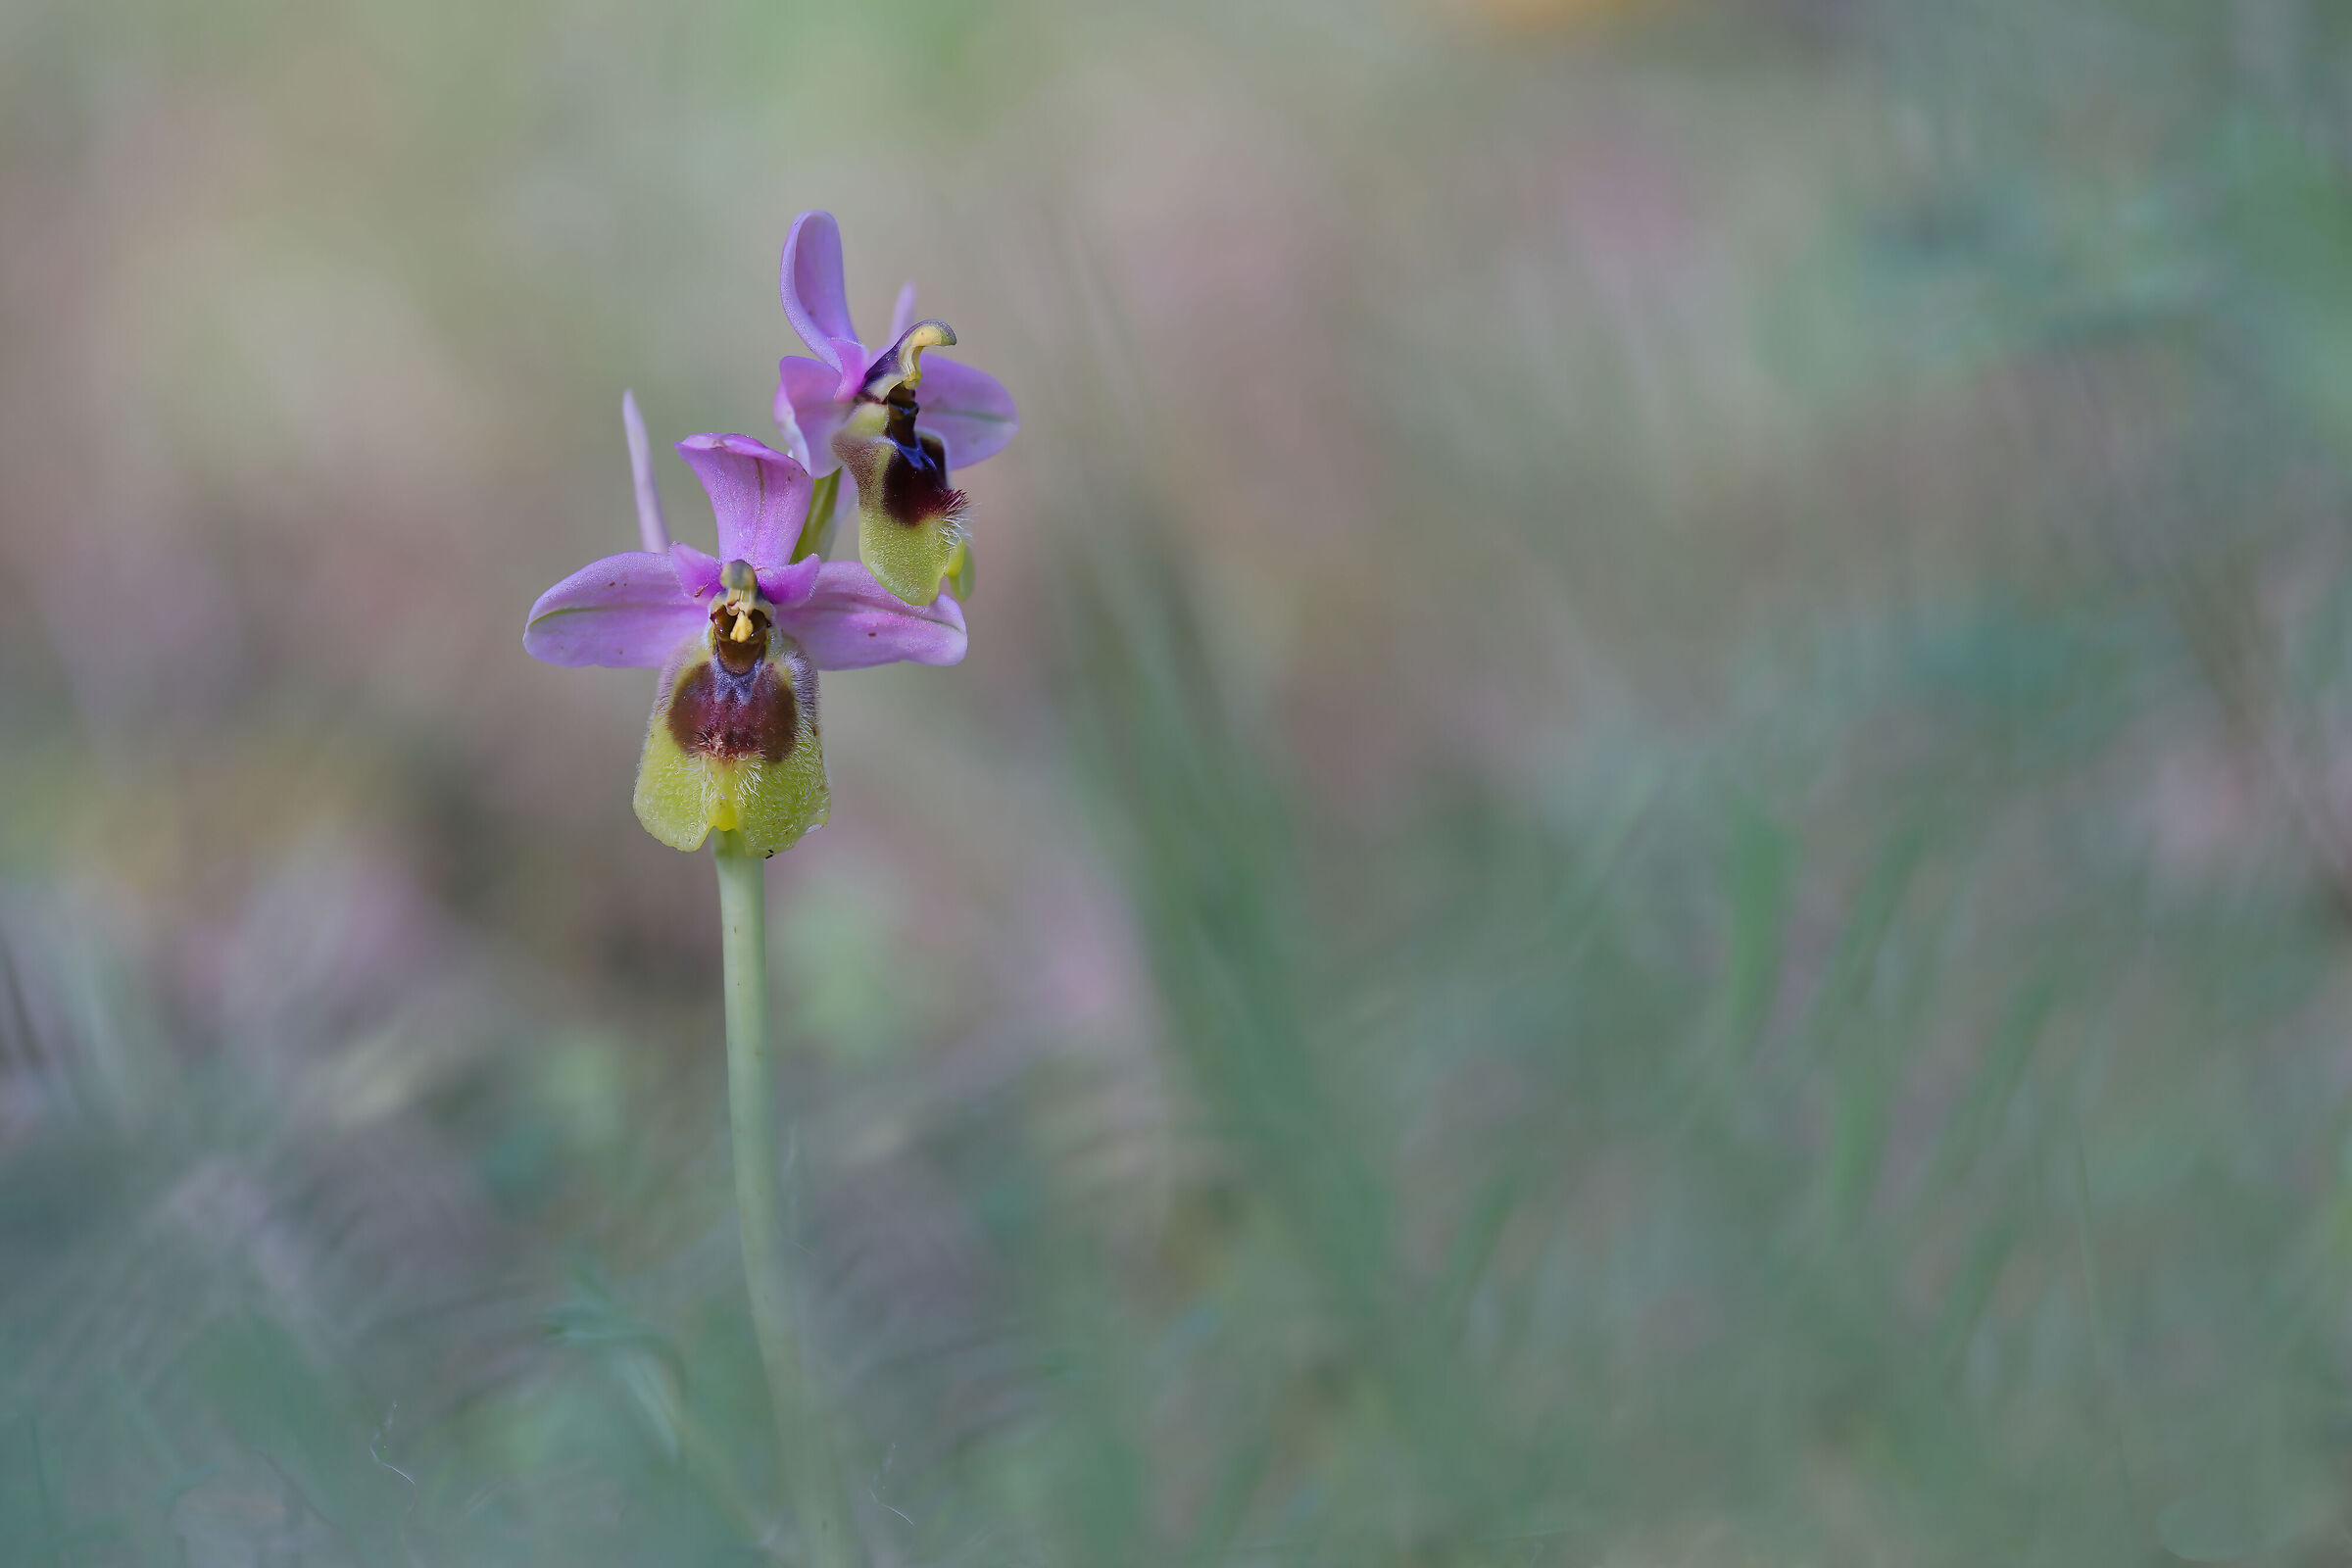 Small wild orchid "Ophrys tenthredinifera"...